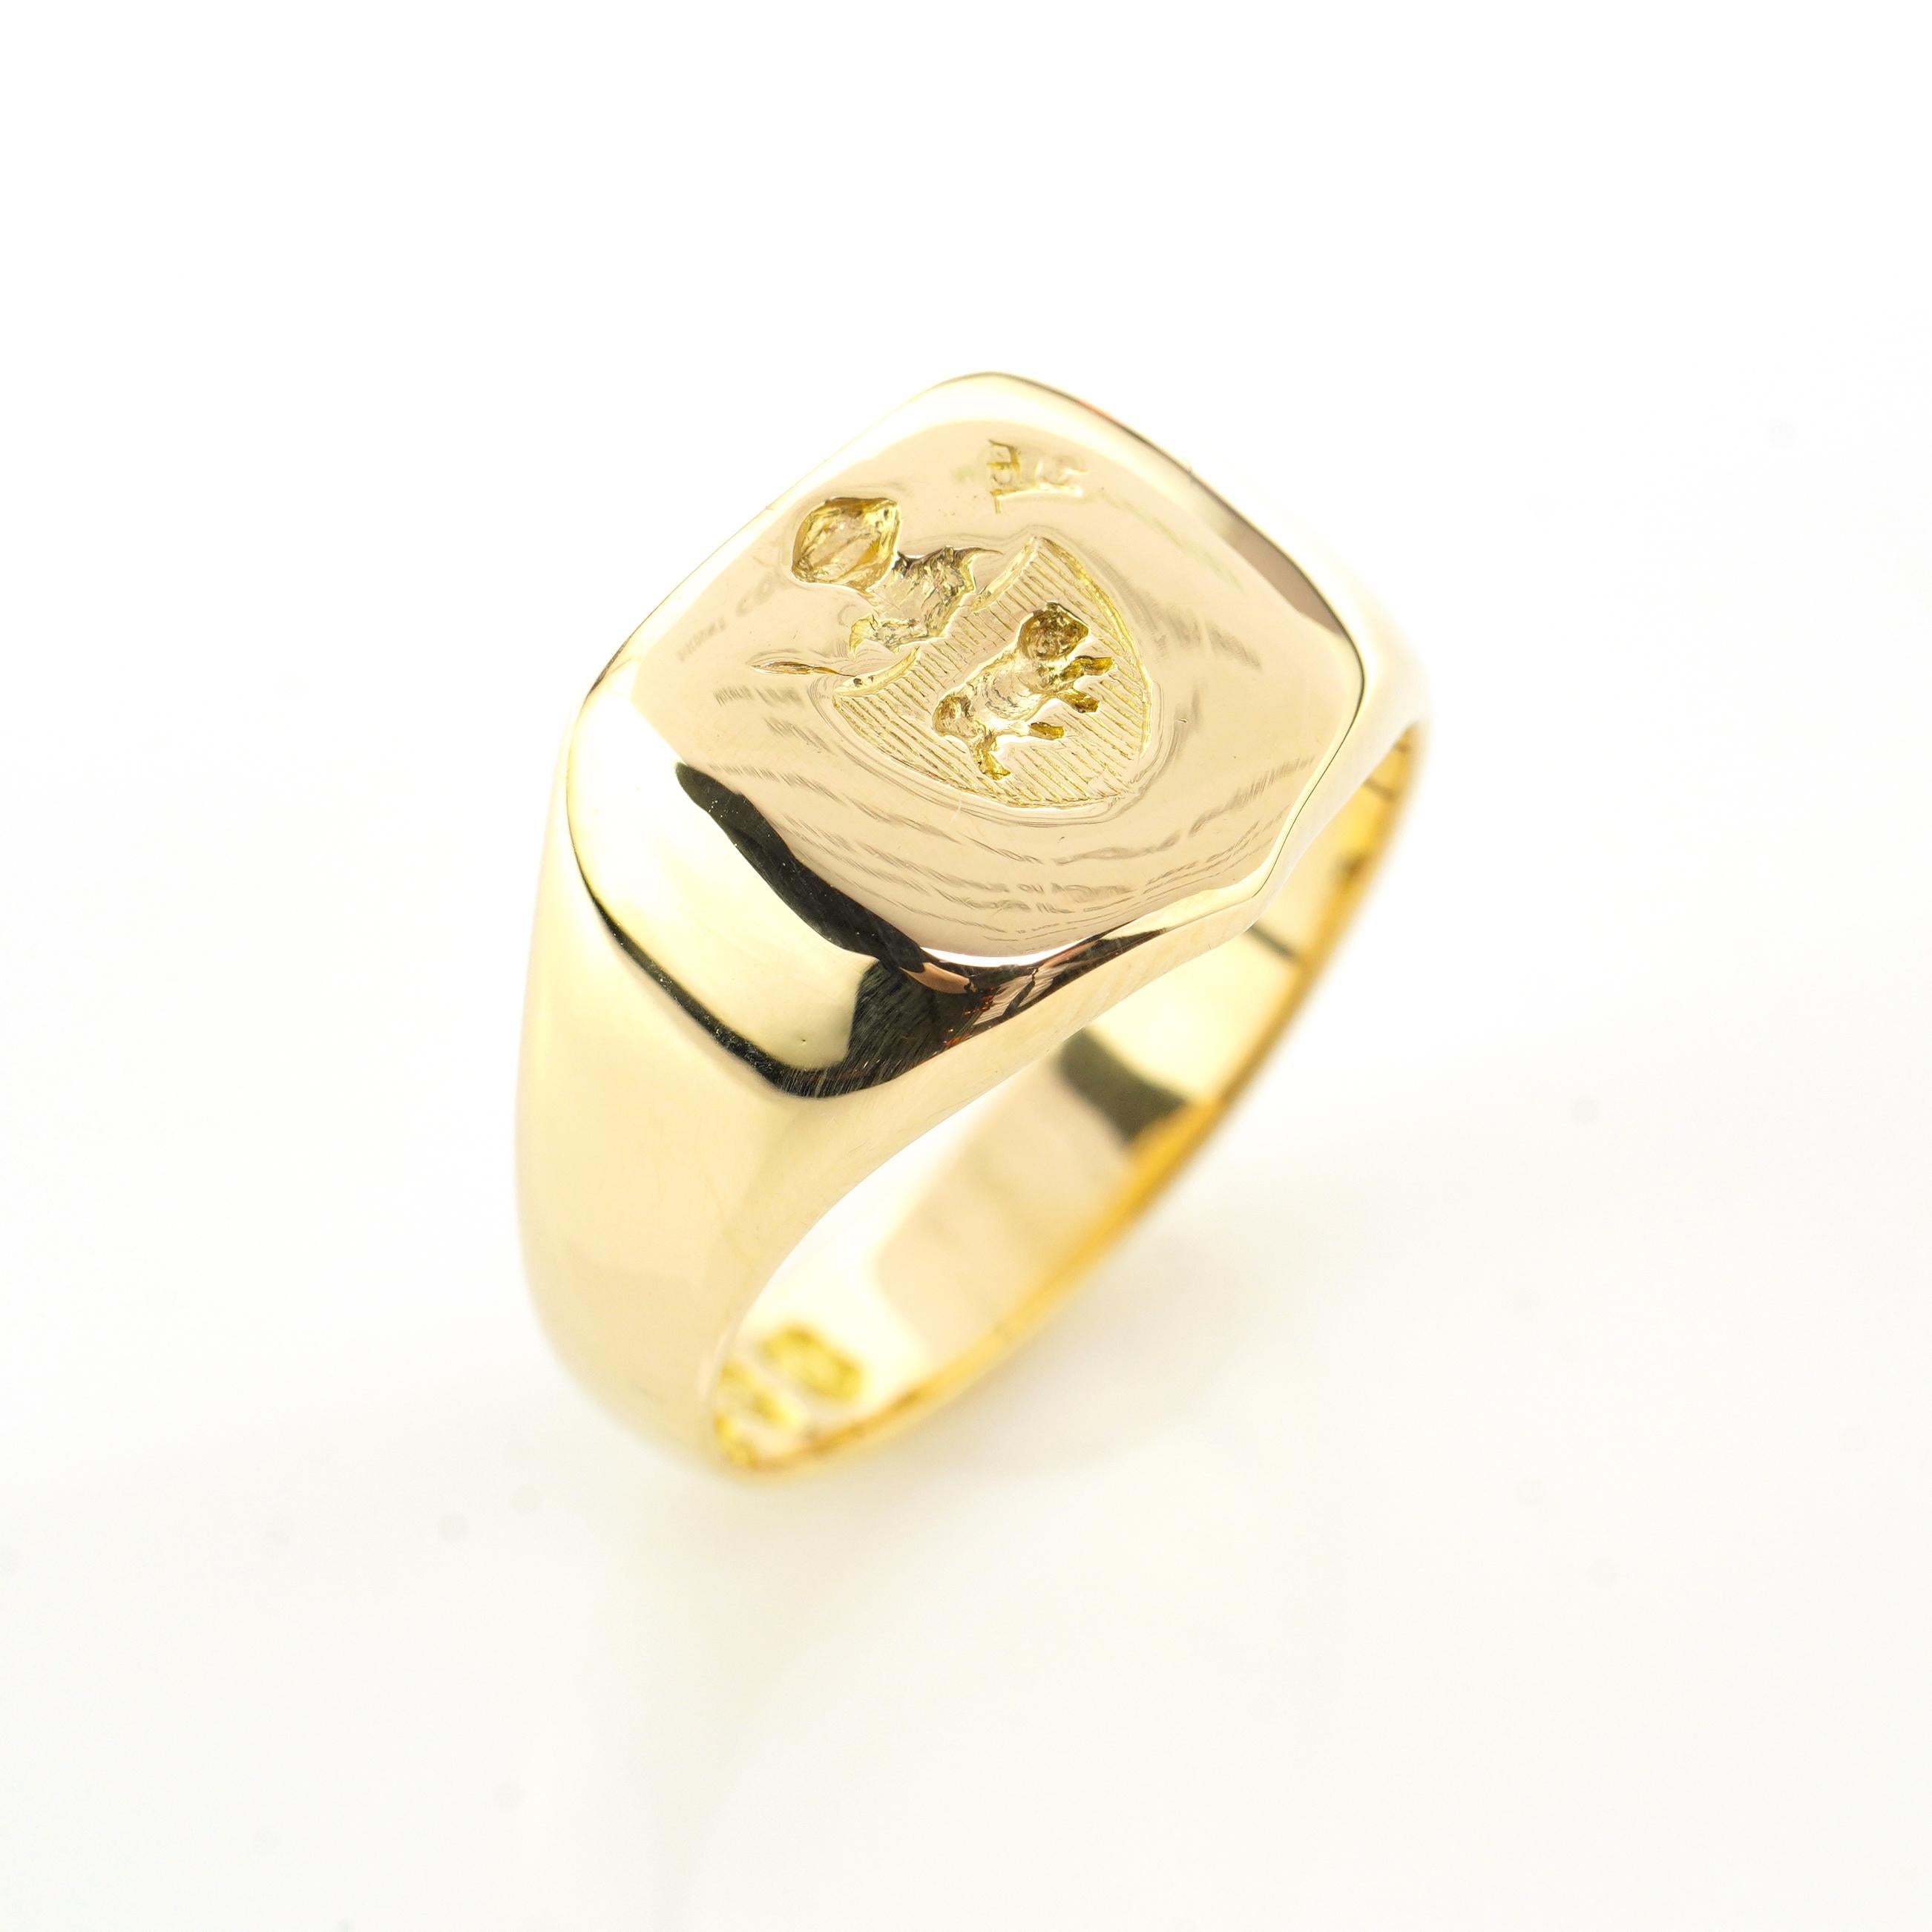 Men's Vintage 18kt. Yellow Gold Signet Ring with Coat of Arms